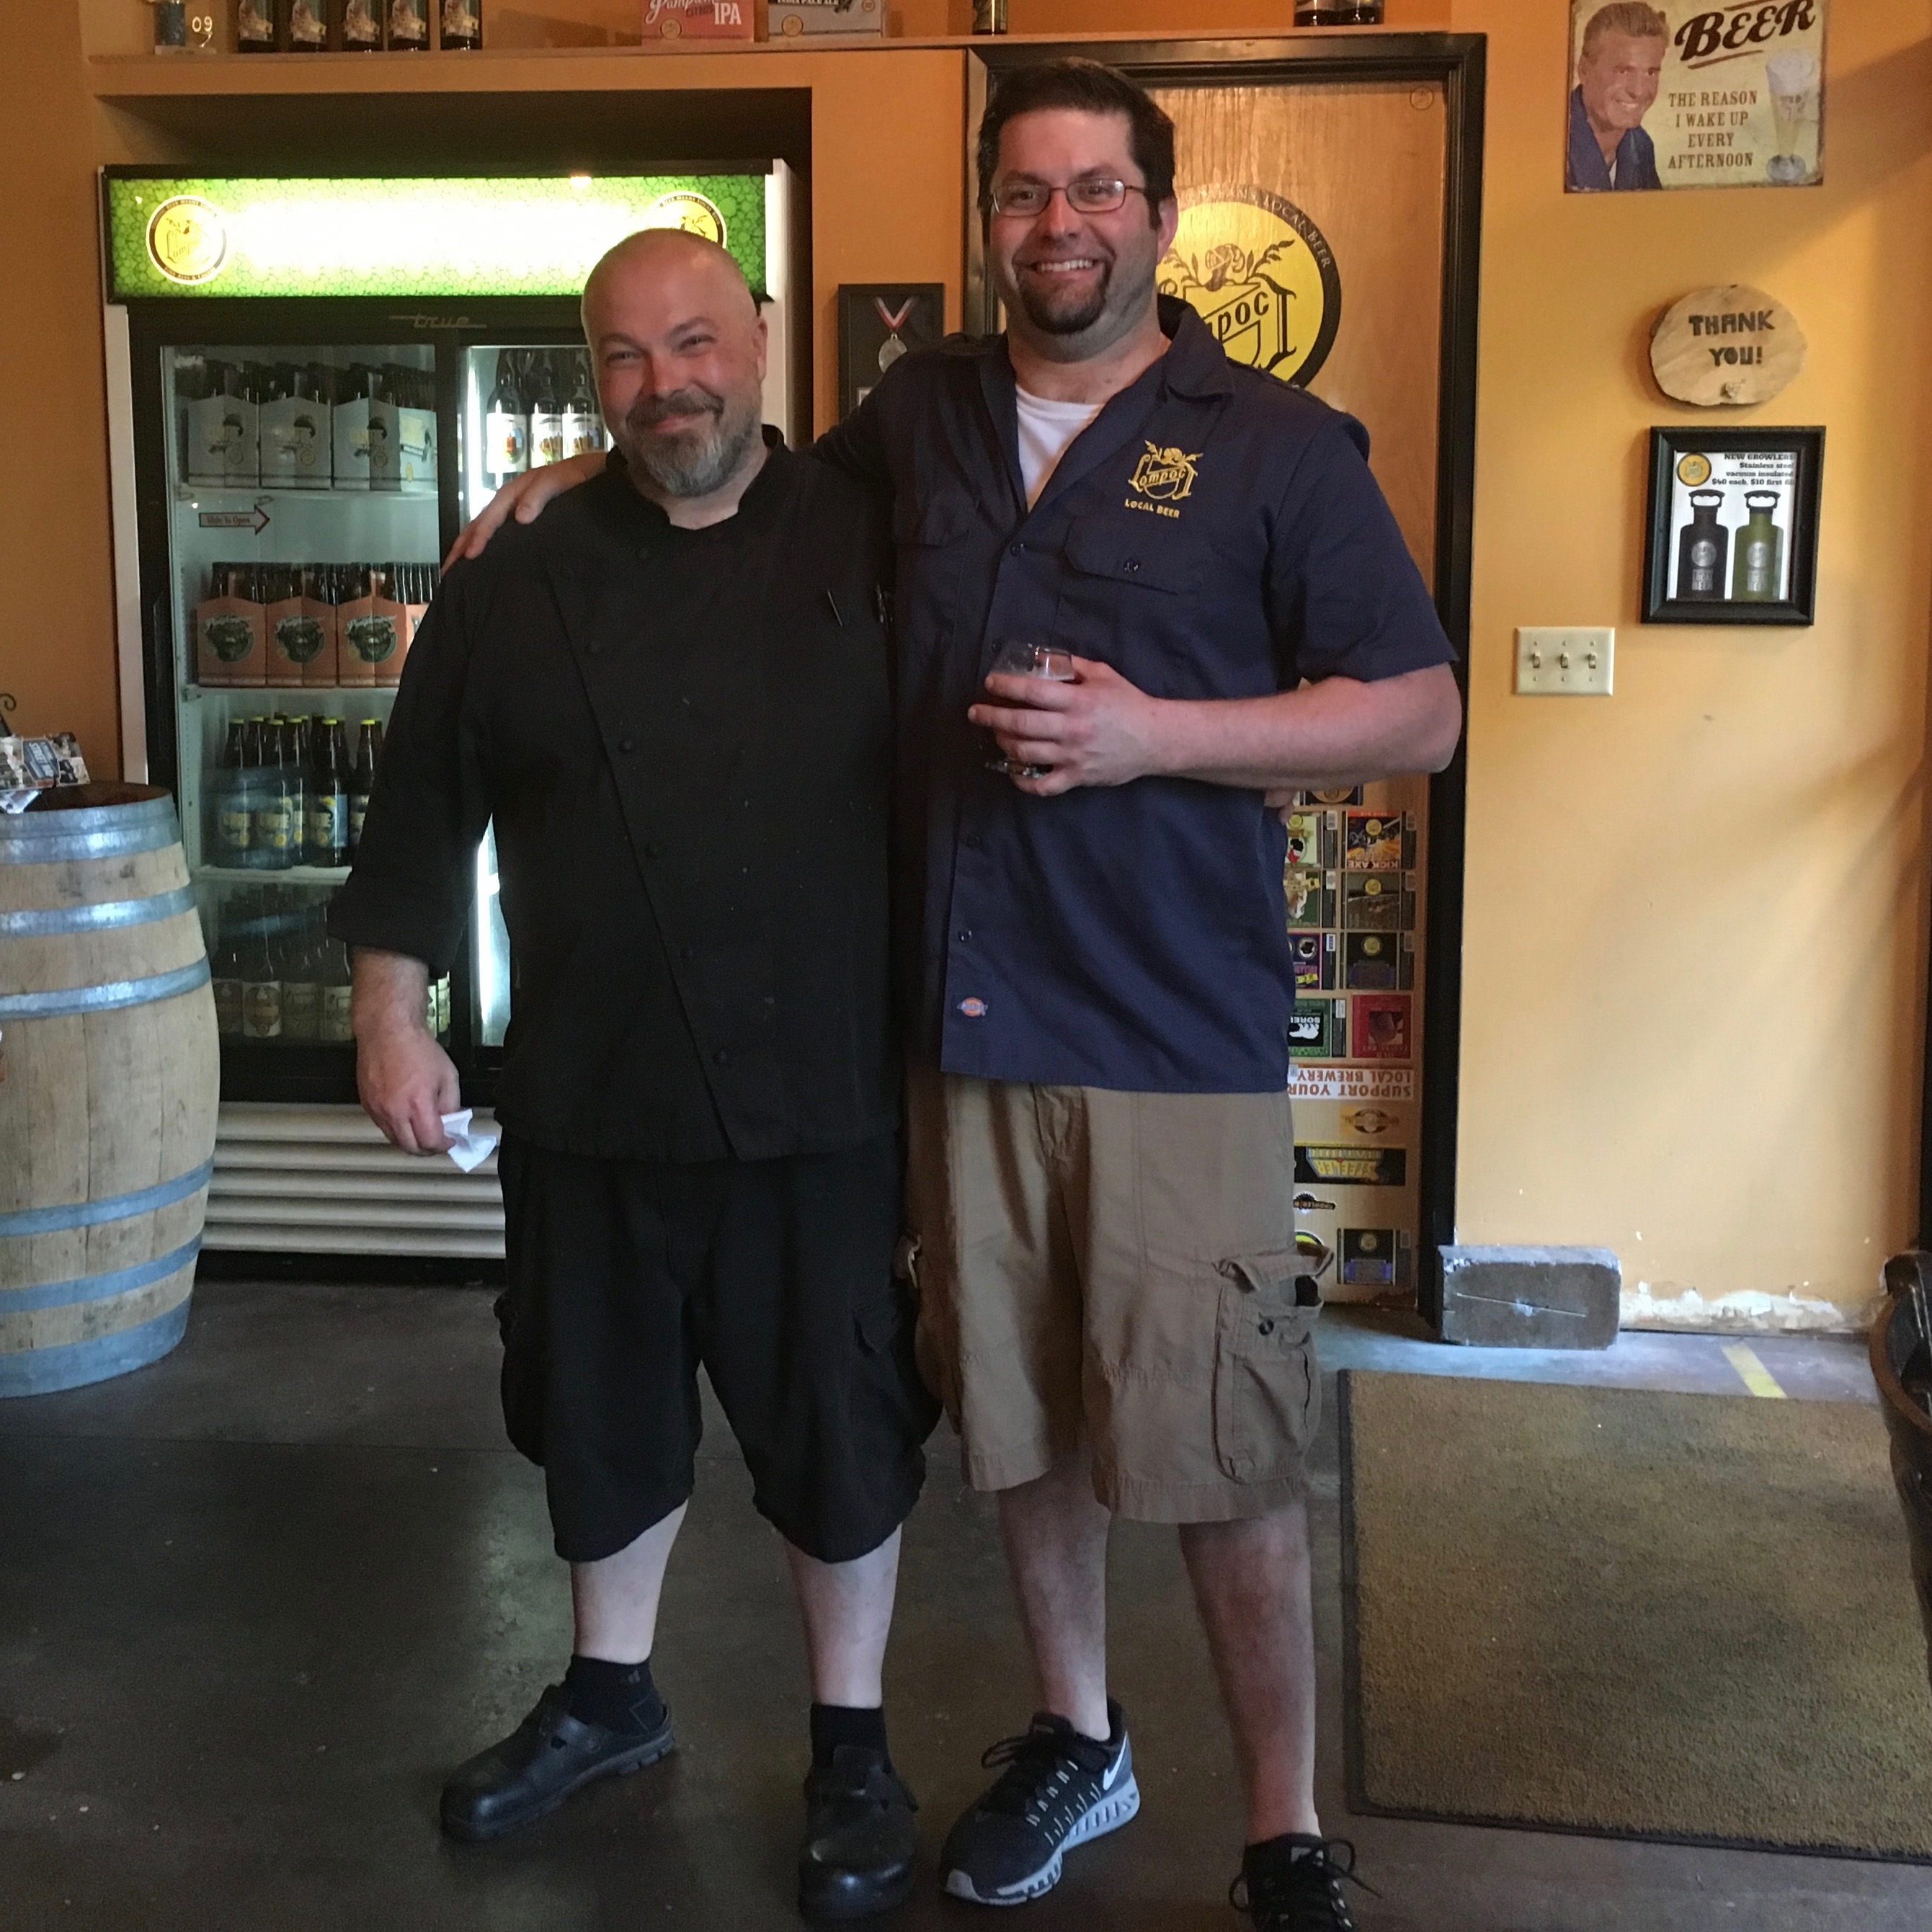 Lompoc Chef Mark Otey and Lompoc Brewer Bryan Keilty at a recent event at Lompoc's Sidebar. (photo by D.J. Paul)